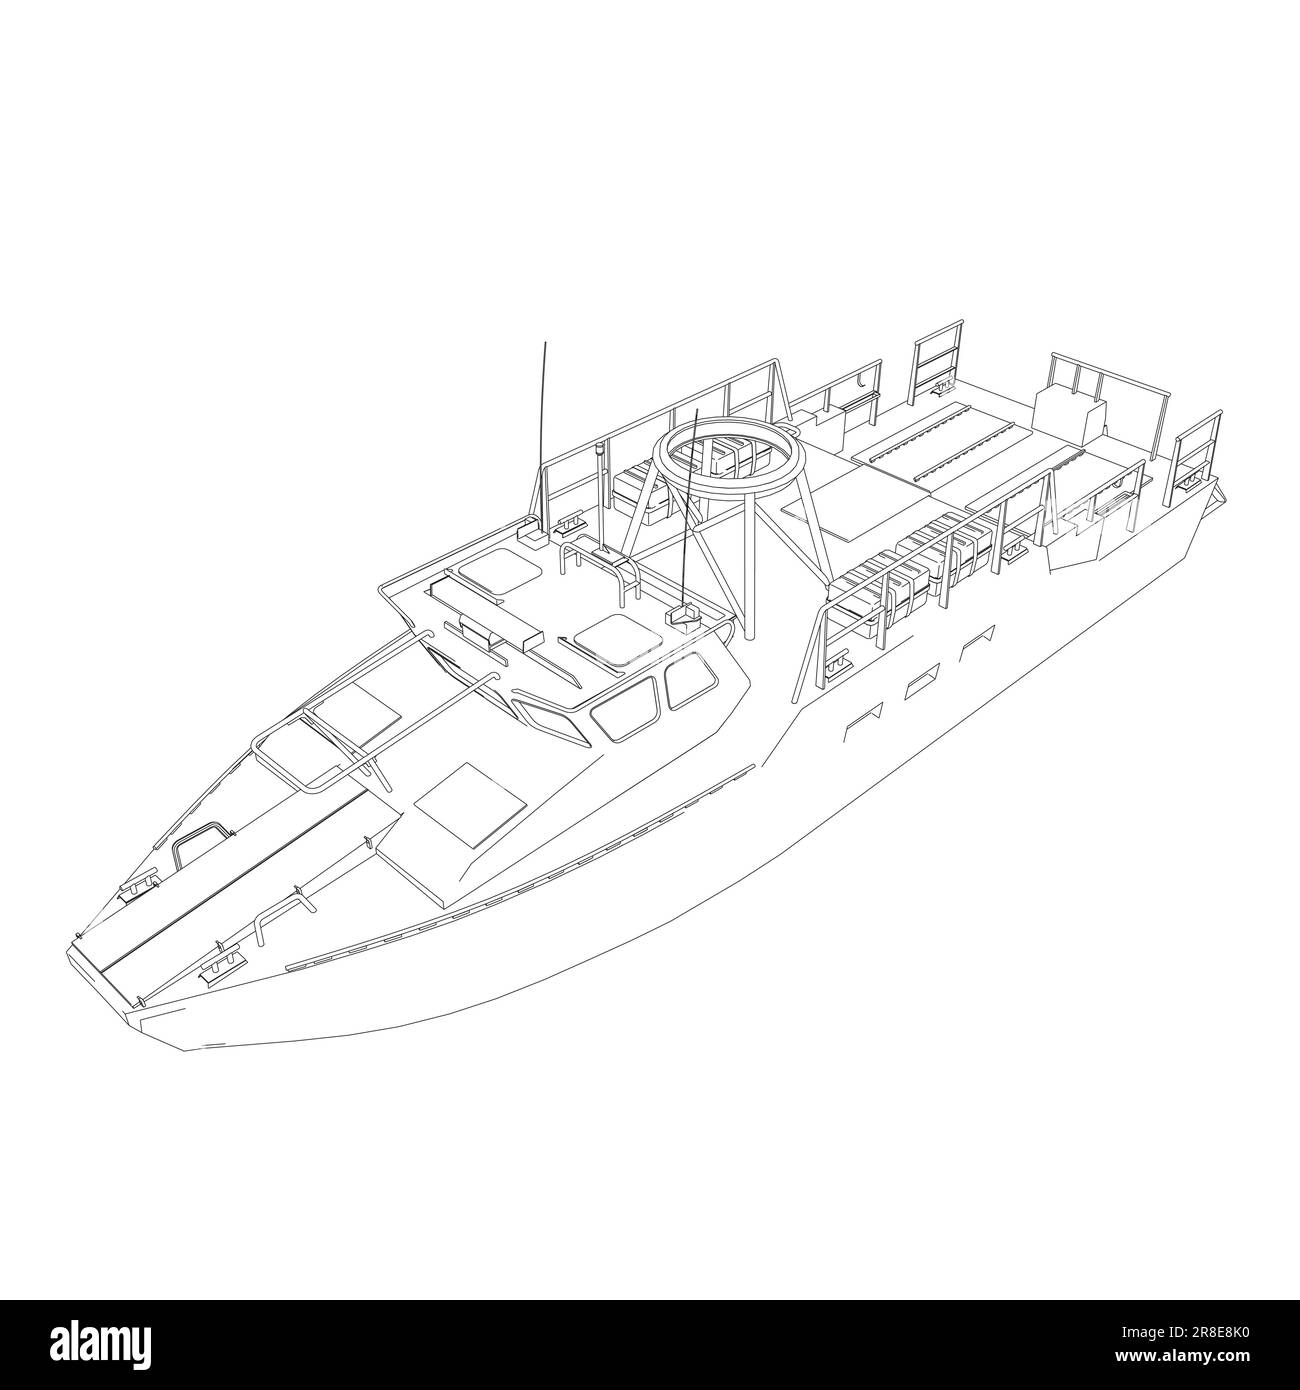 Warship icon outline. Military ships and naval vessels. isolated vector images. Military ship outline vector. Military vehicle template vector isolate Stock Vector